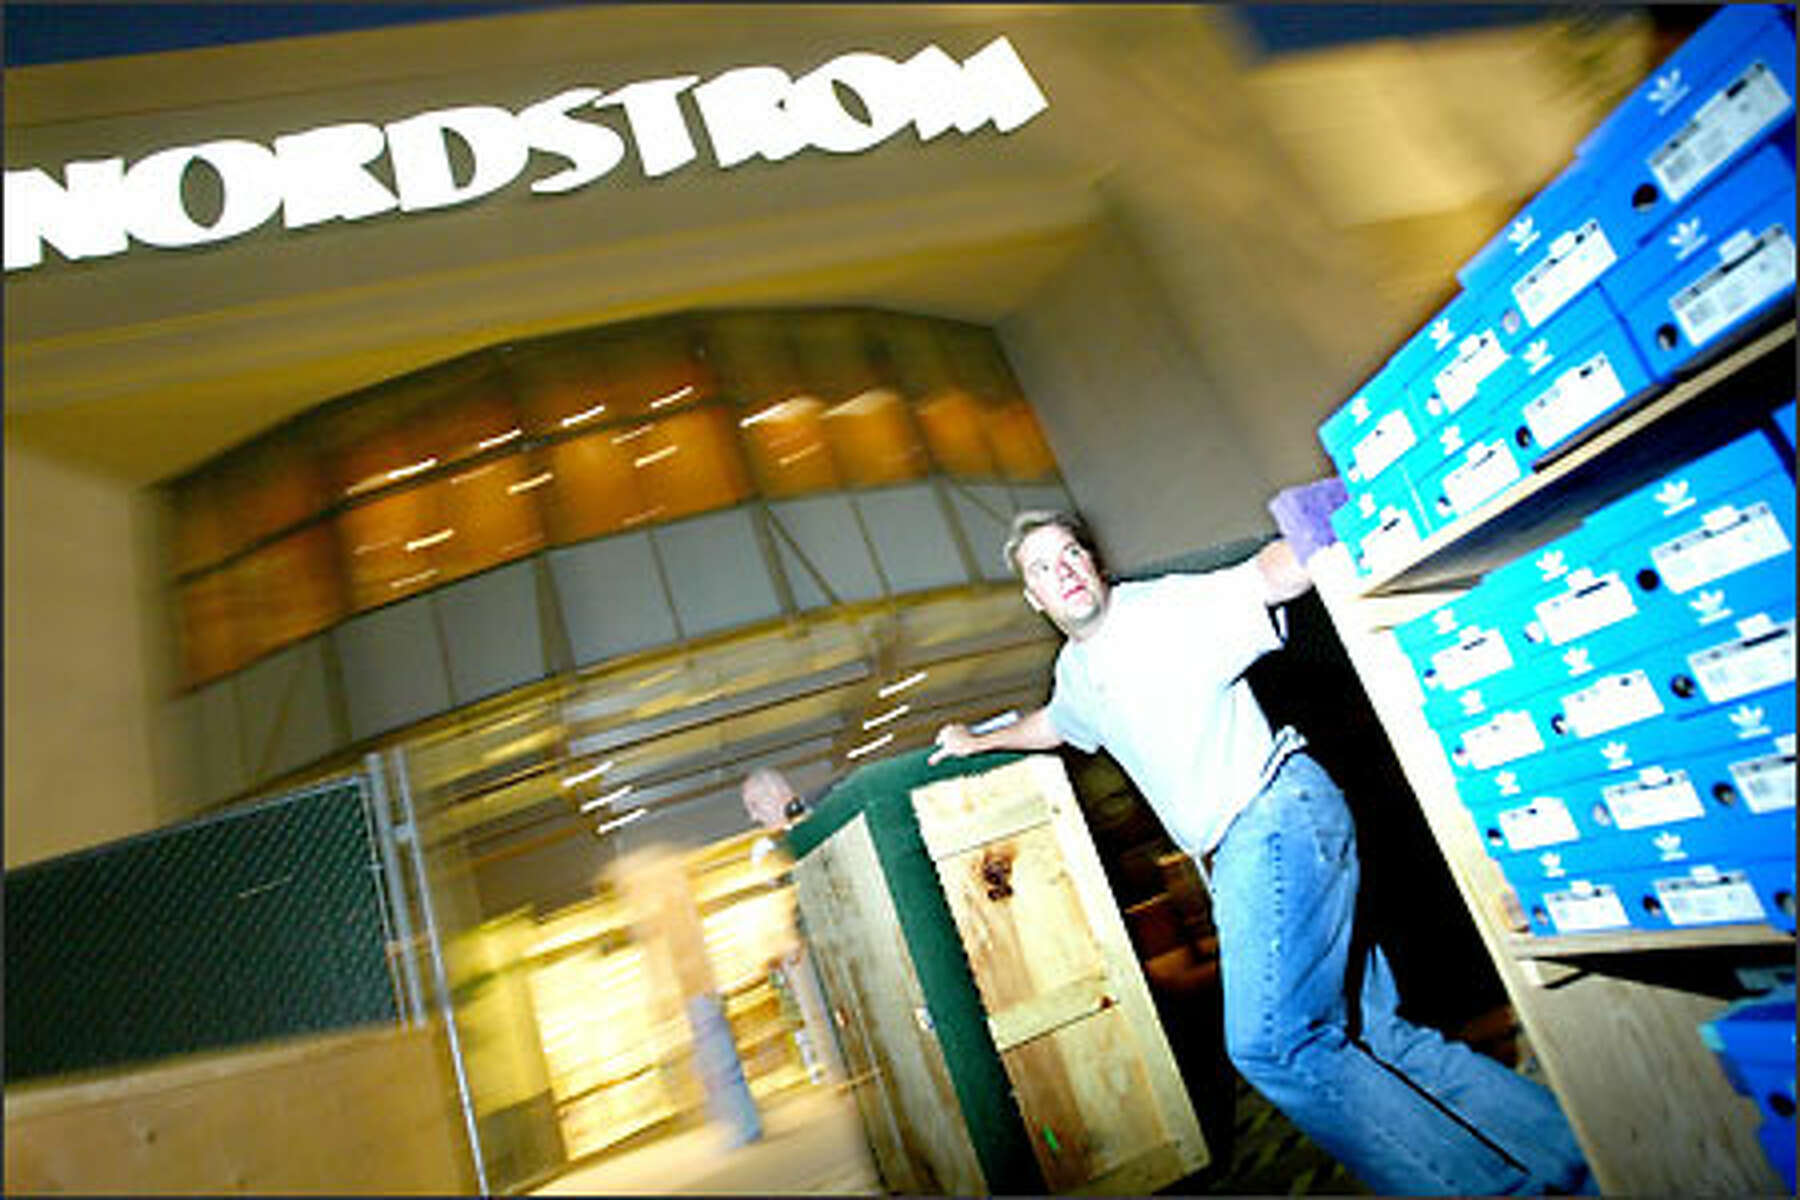 The Department Store Museum: Nordstrom, Seattle Washington